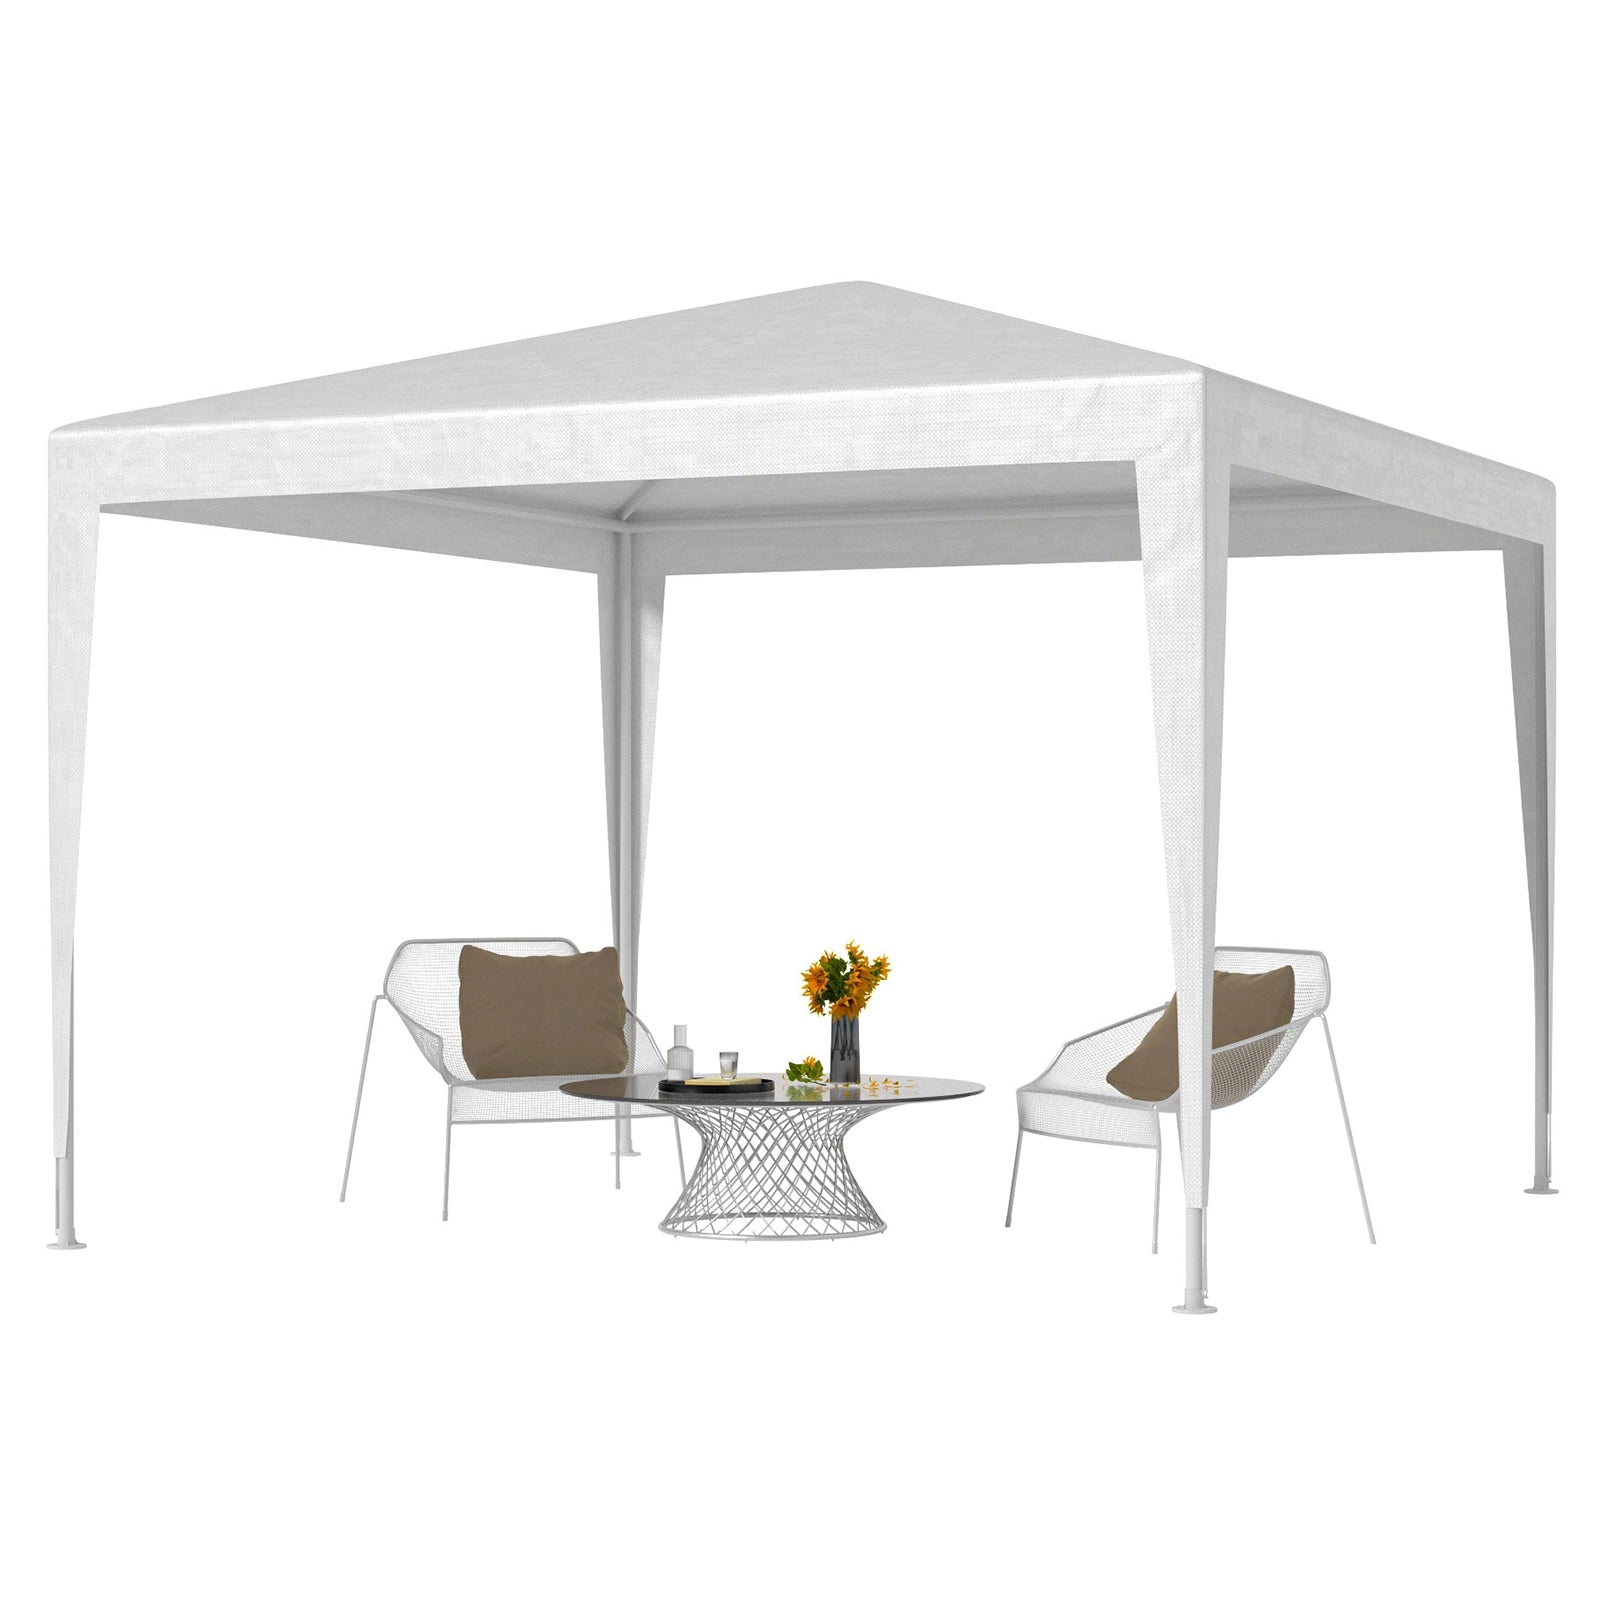 FUNG YARD 10' × 10' Outdoor Portable Canopy For Patio